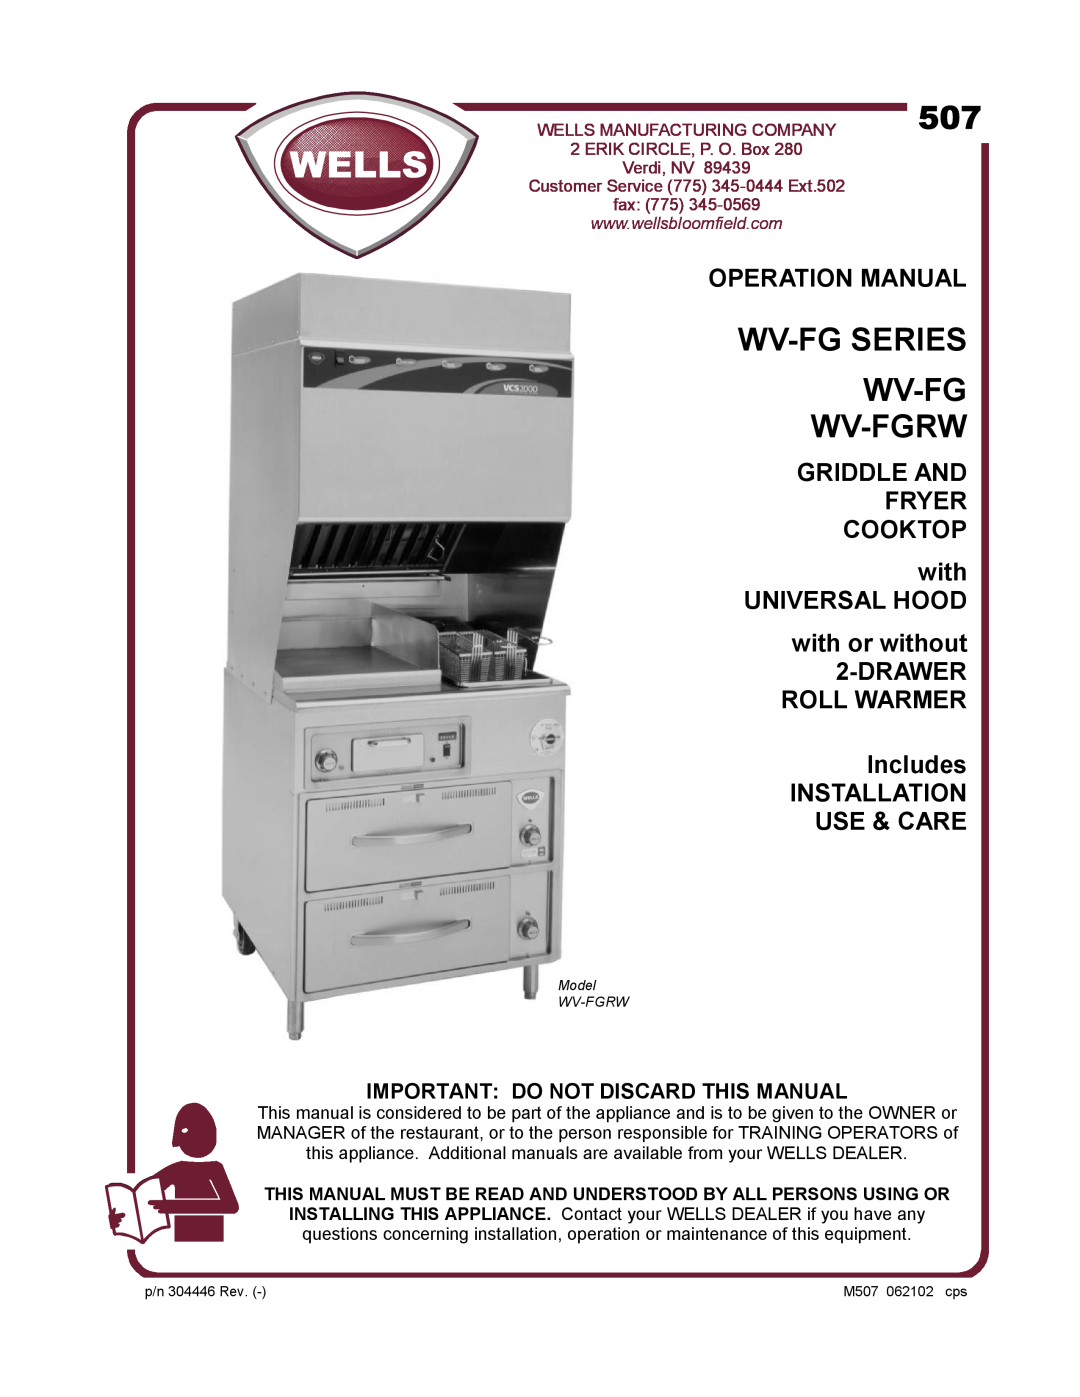 Wells WV-FGRW operation manual GRIDDLE AND FRYER COOKTOP with UNIVERSAL HOOD, Important Do Not Discard This Manual, fax 